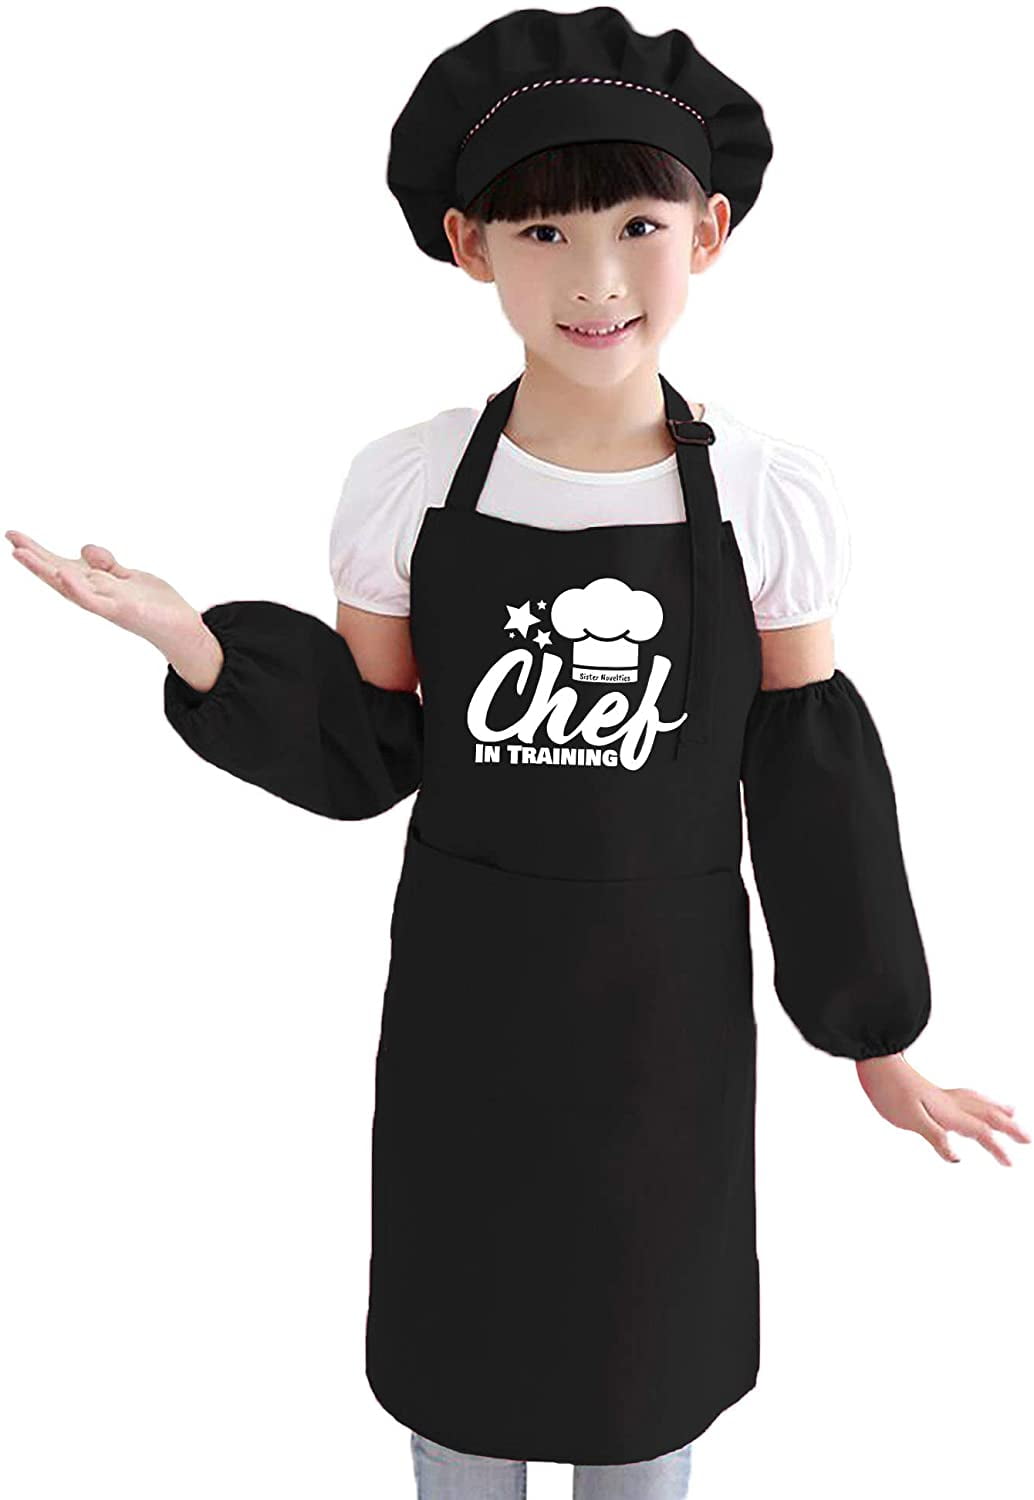 Kid's Aprons Gift Idea Children's Aprons Kid's Arts & Crafts Aprons Play Time